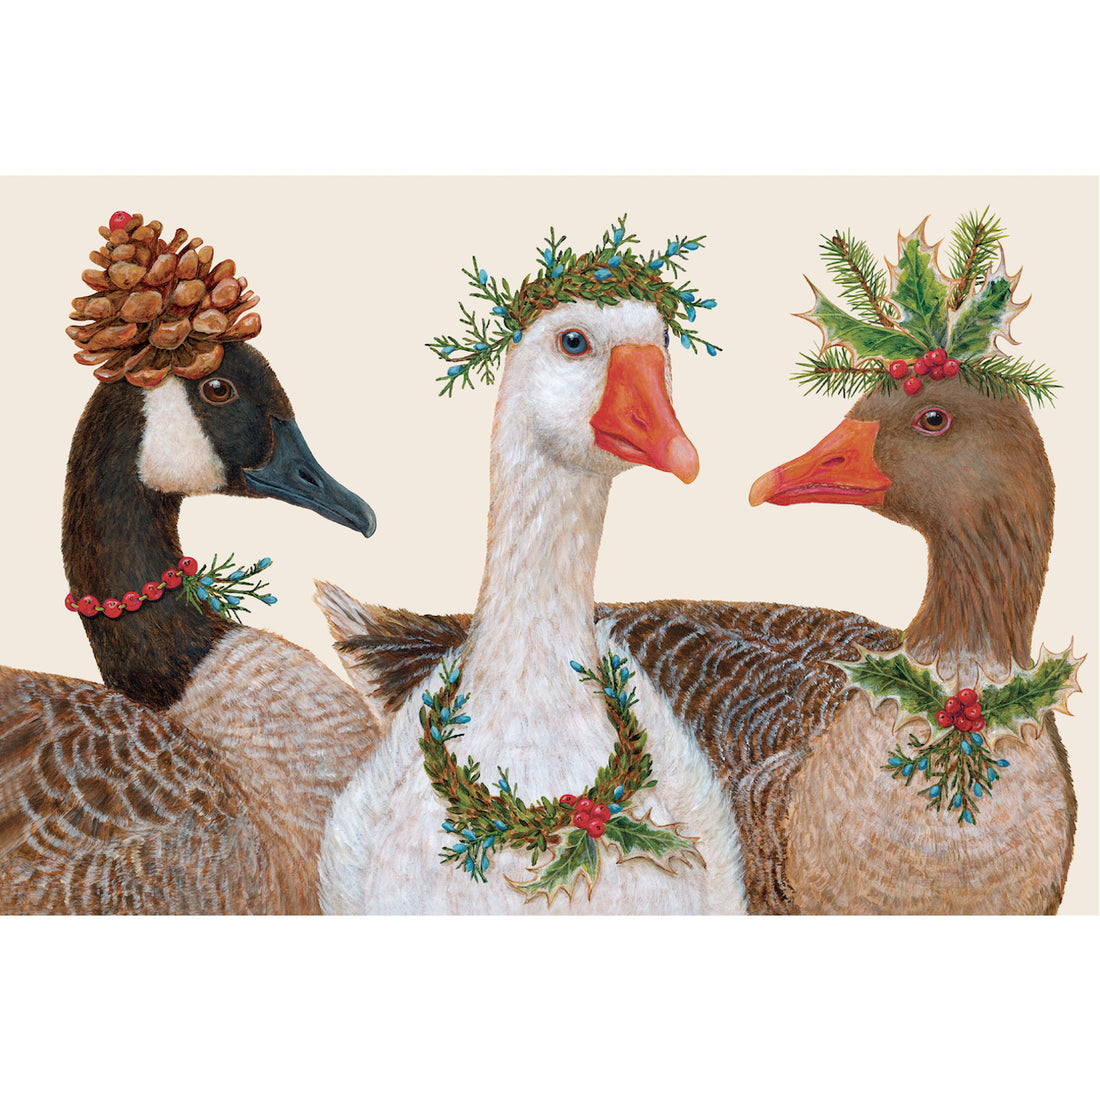 Hester &amp; Cook Festive Geese Placemat wearing Christmas garlands in a whimsical style by artist Vicki Sawyer.